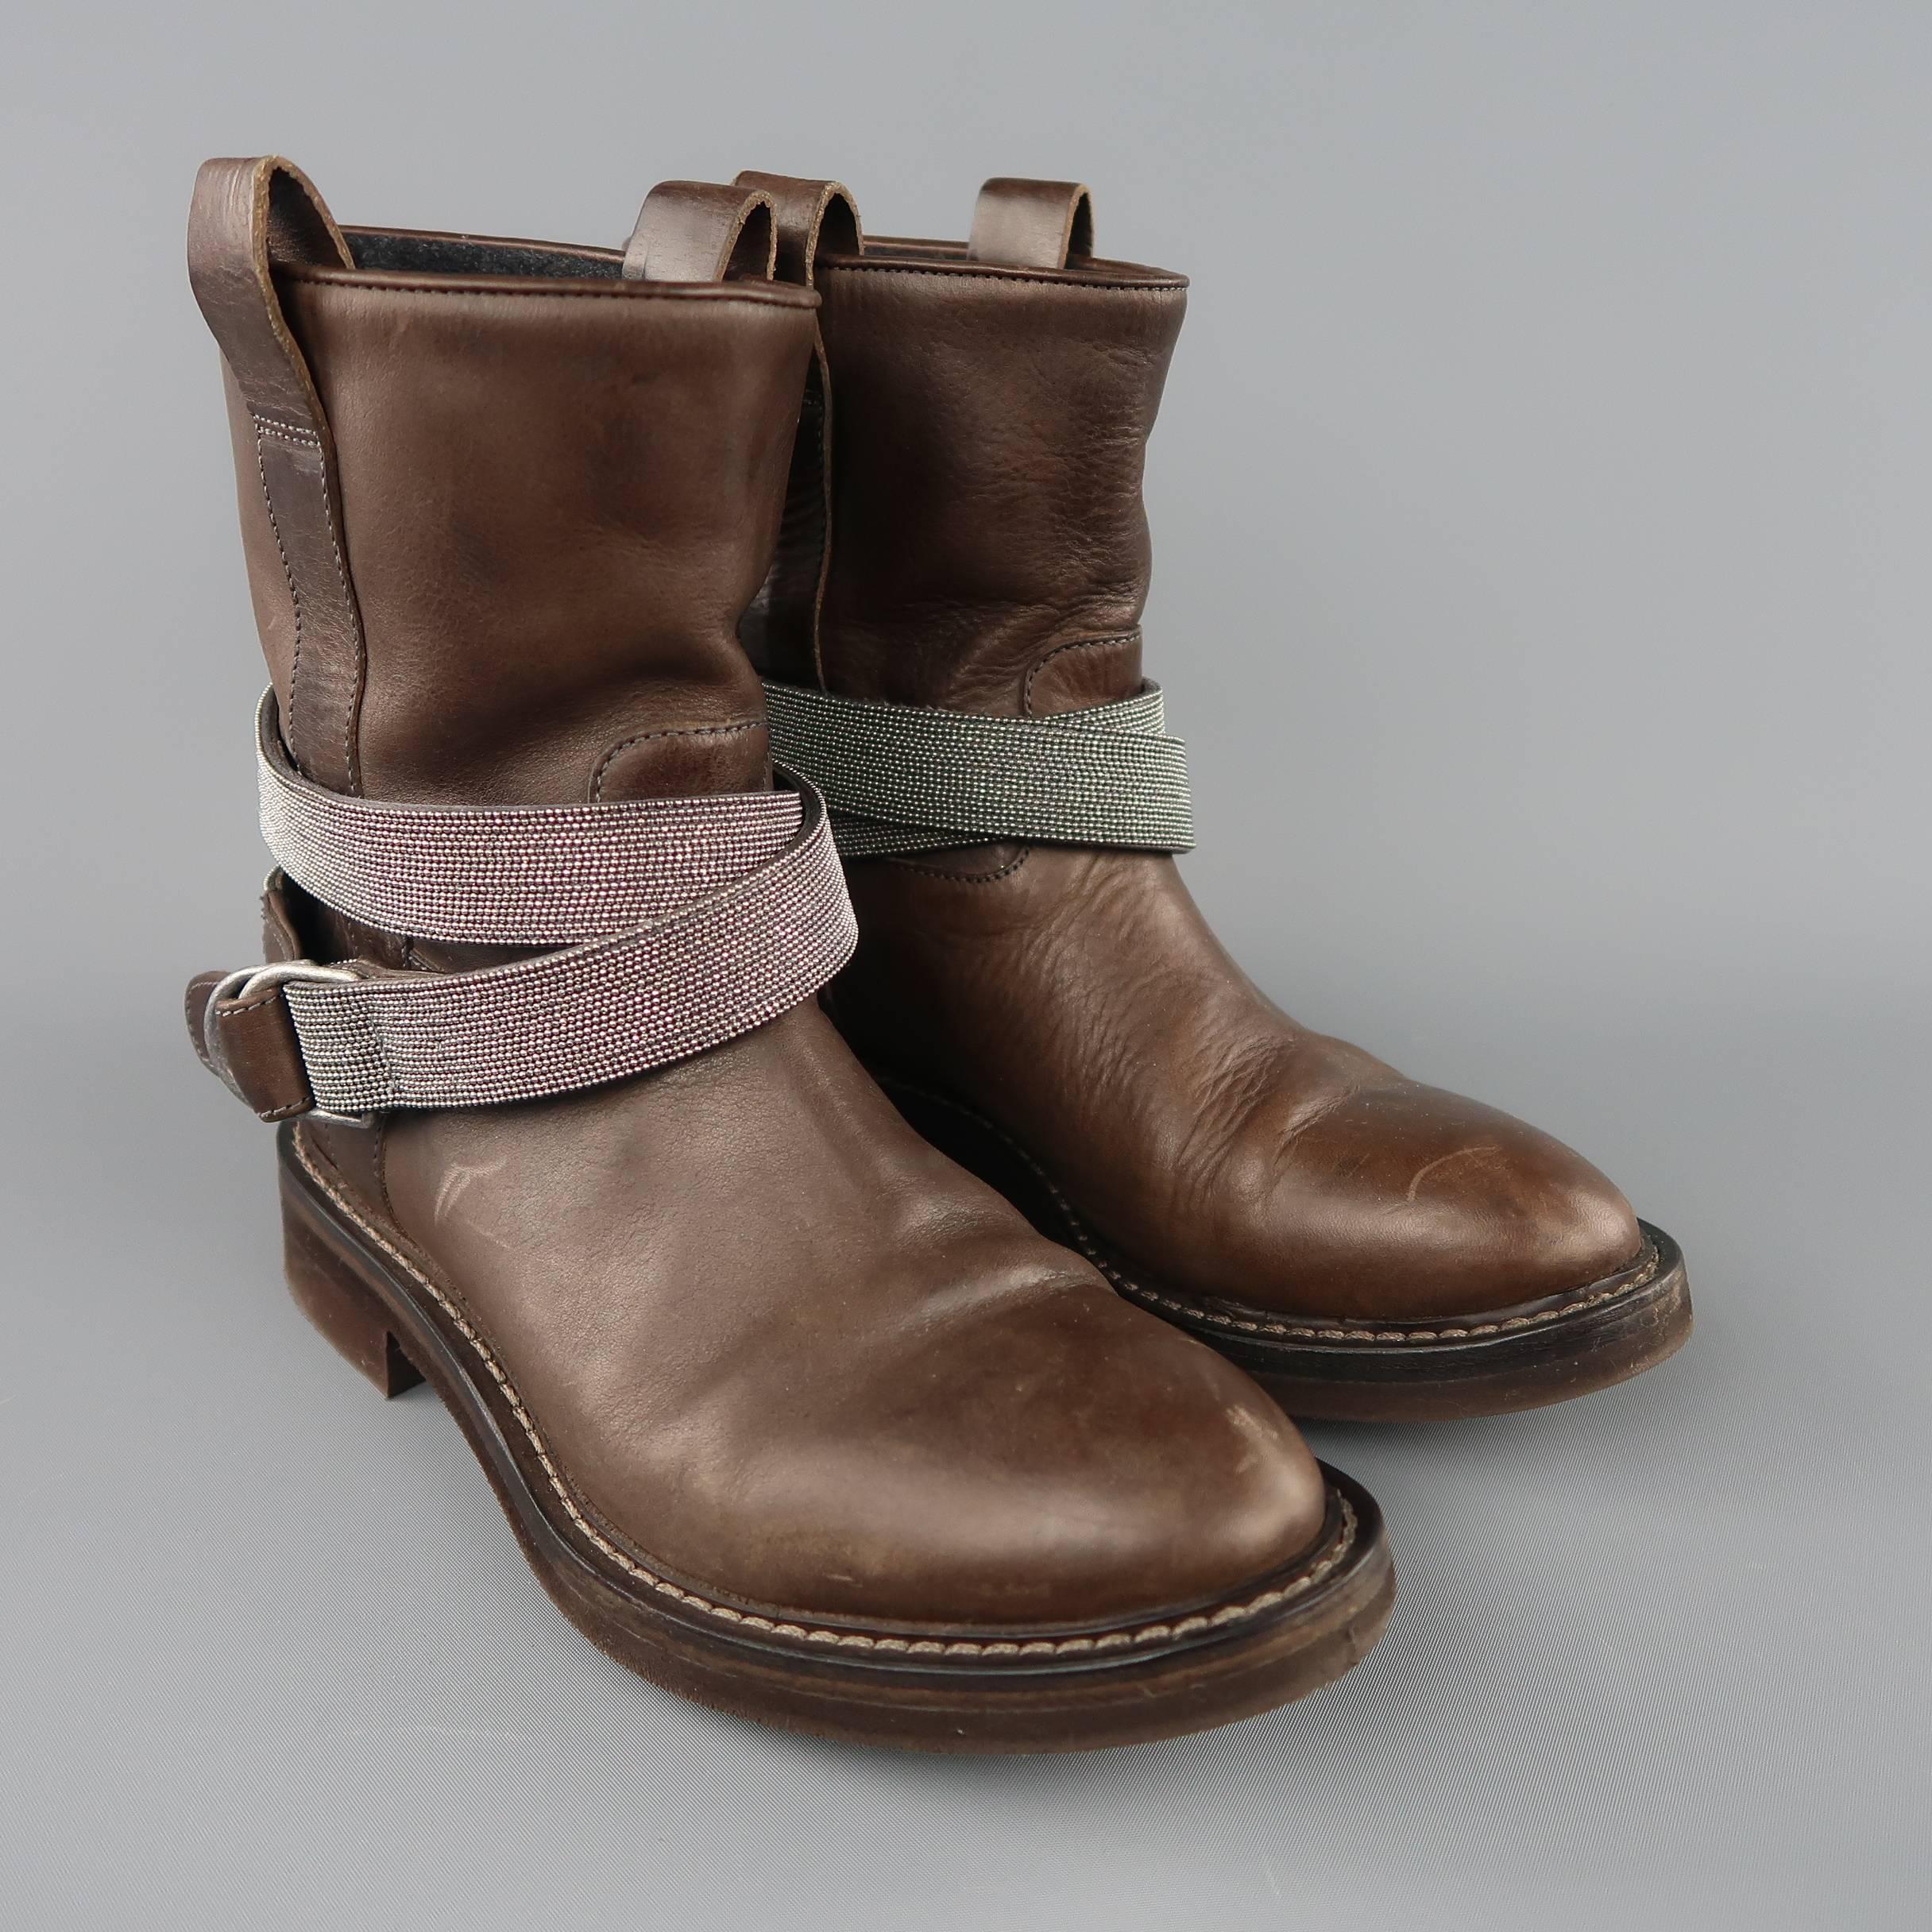 BRUNELLO CUCINELLI biker style boots come in chocolate brown leather with a pointed toe, thick rubber heeled sole, and wrapped ankle strap with Monoli sparkle beading. With dust bags. Scuffs throughout. As-is. Made in Italy.
 
Fair Pre-Owned